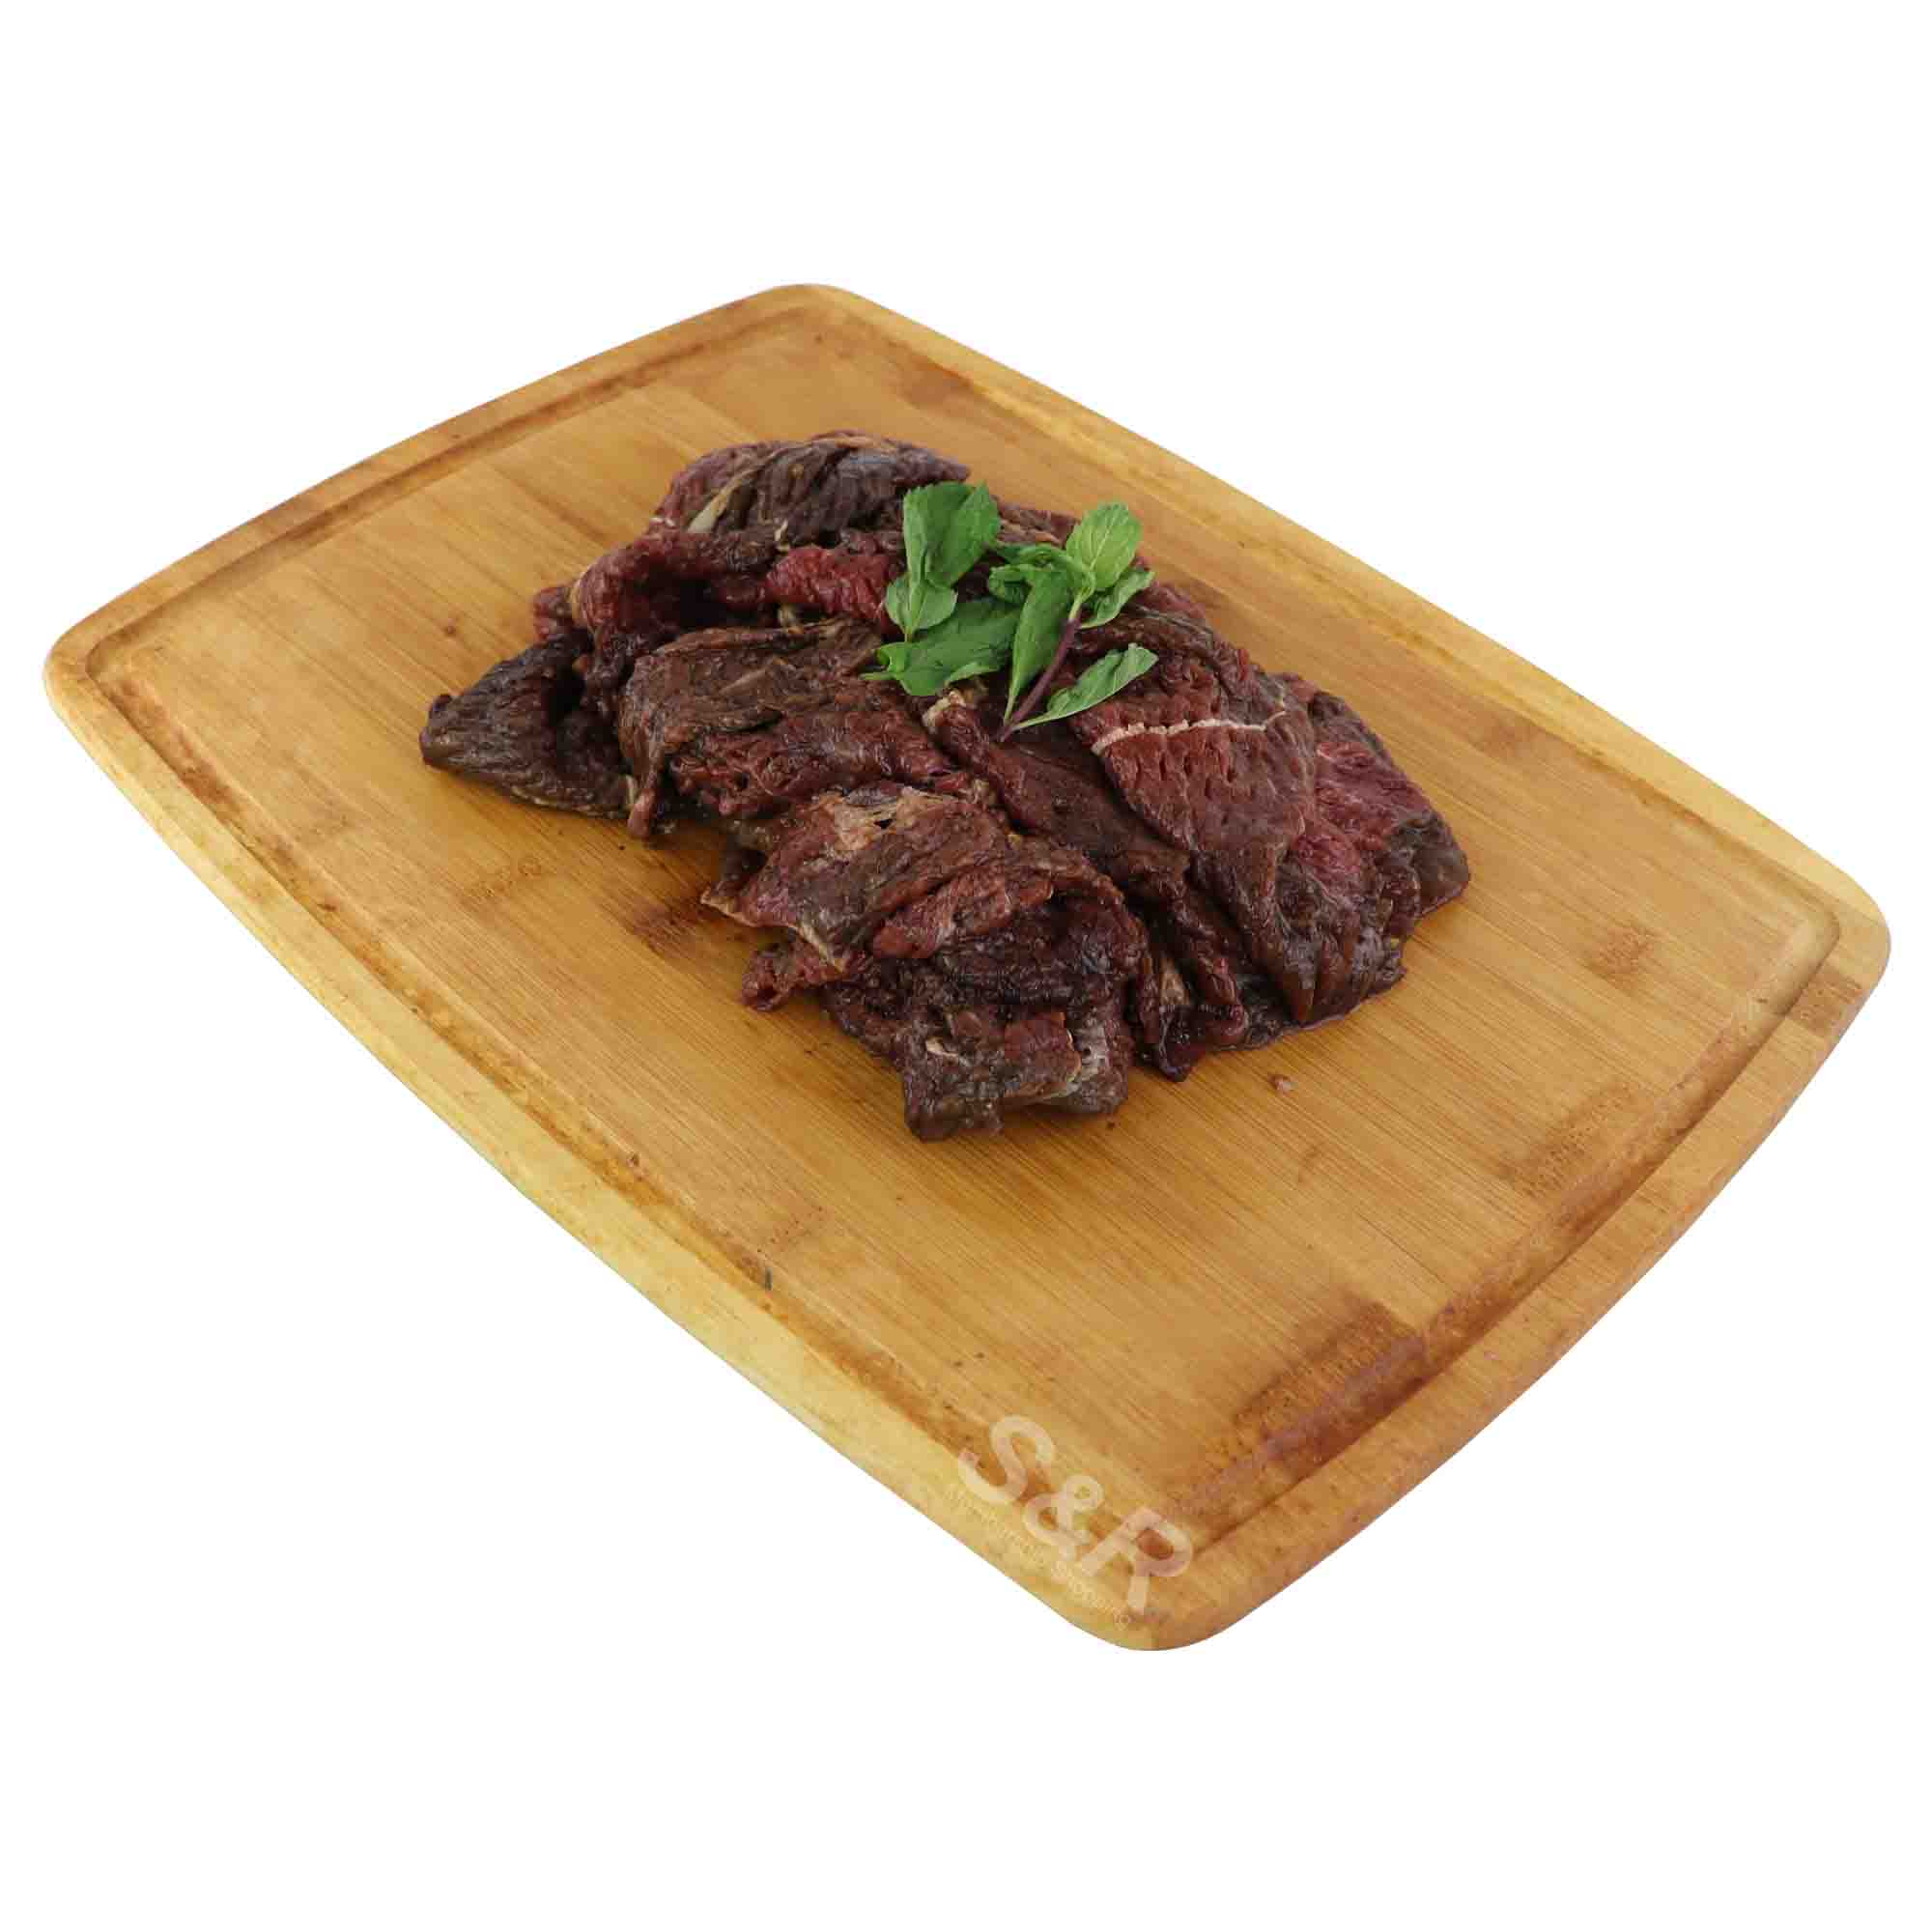 Members' Value Beef Tapa approx. 2kg